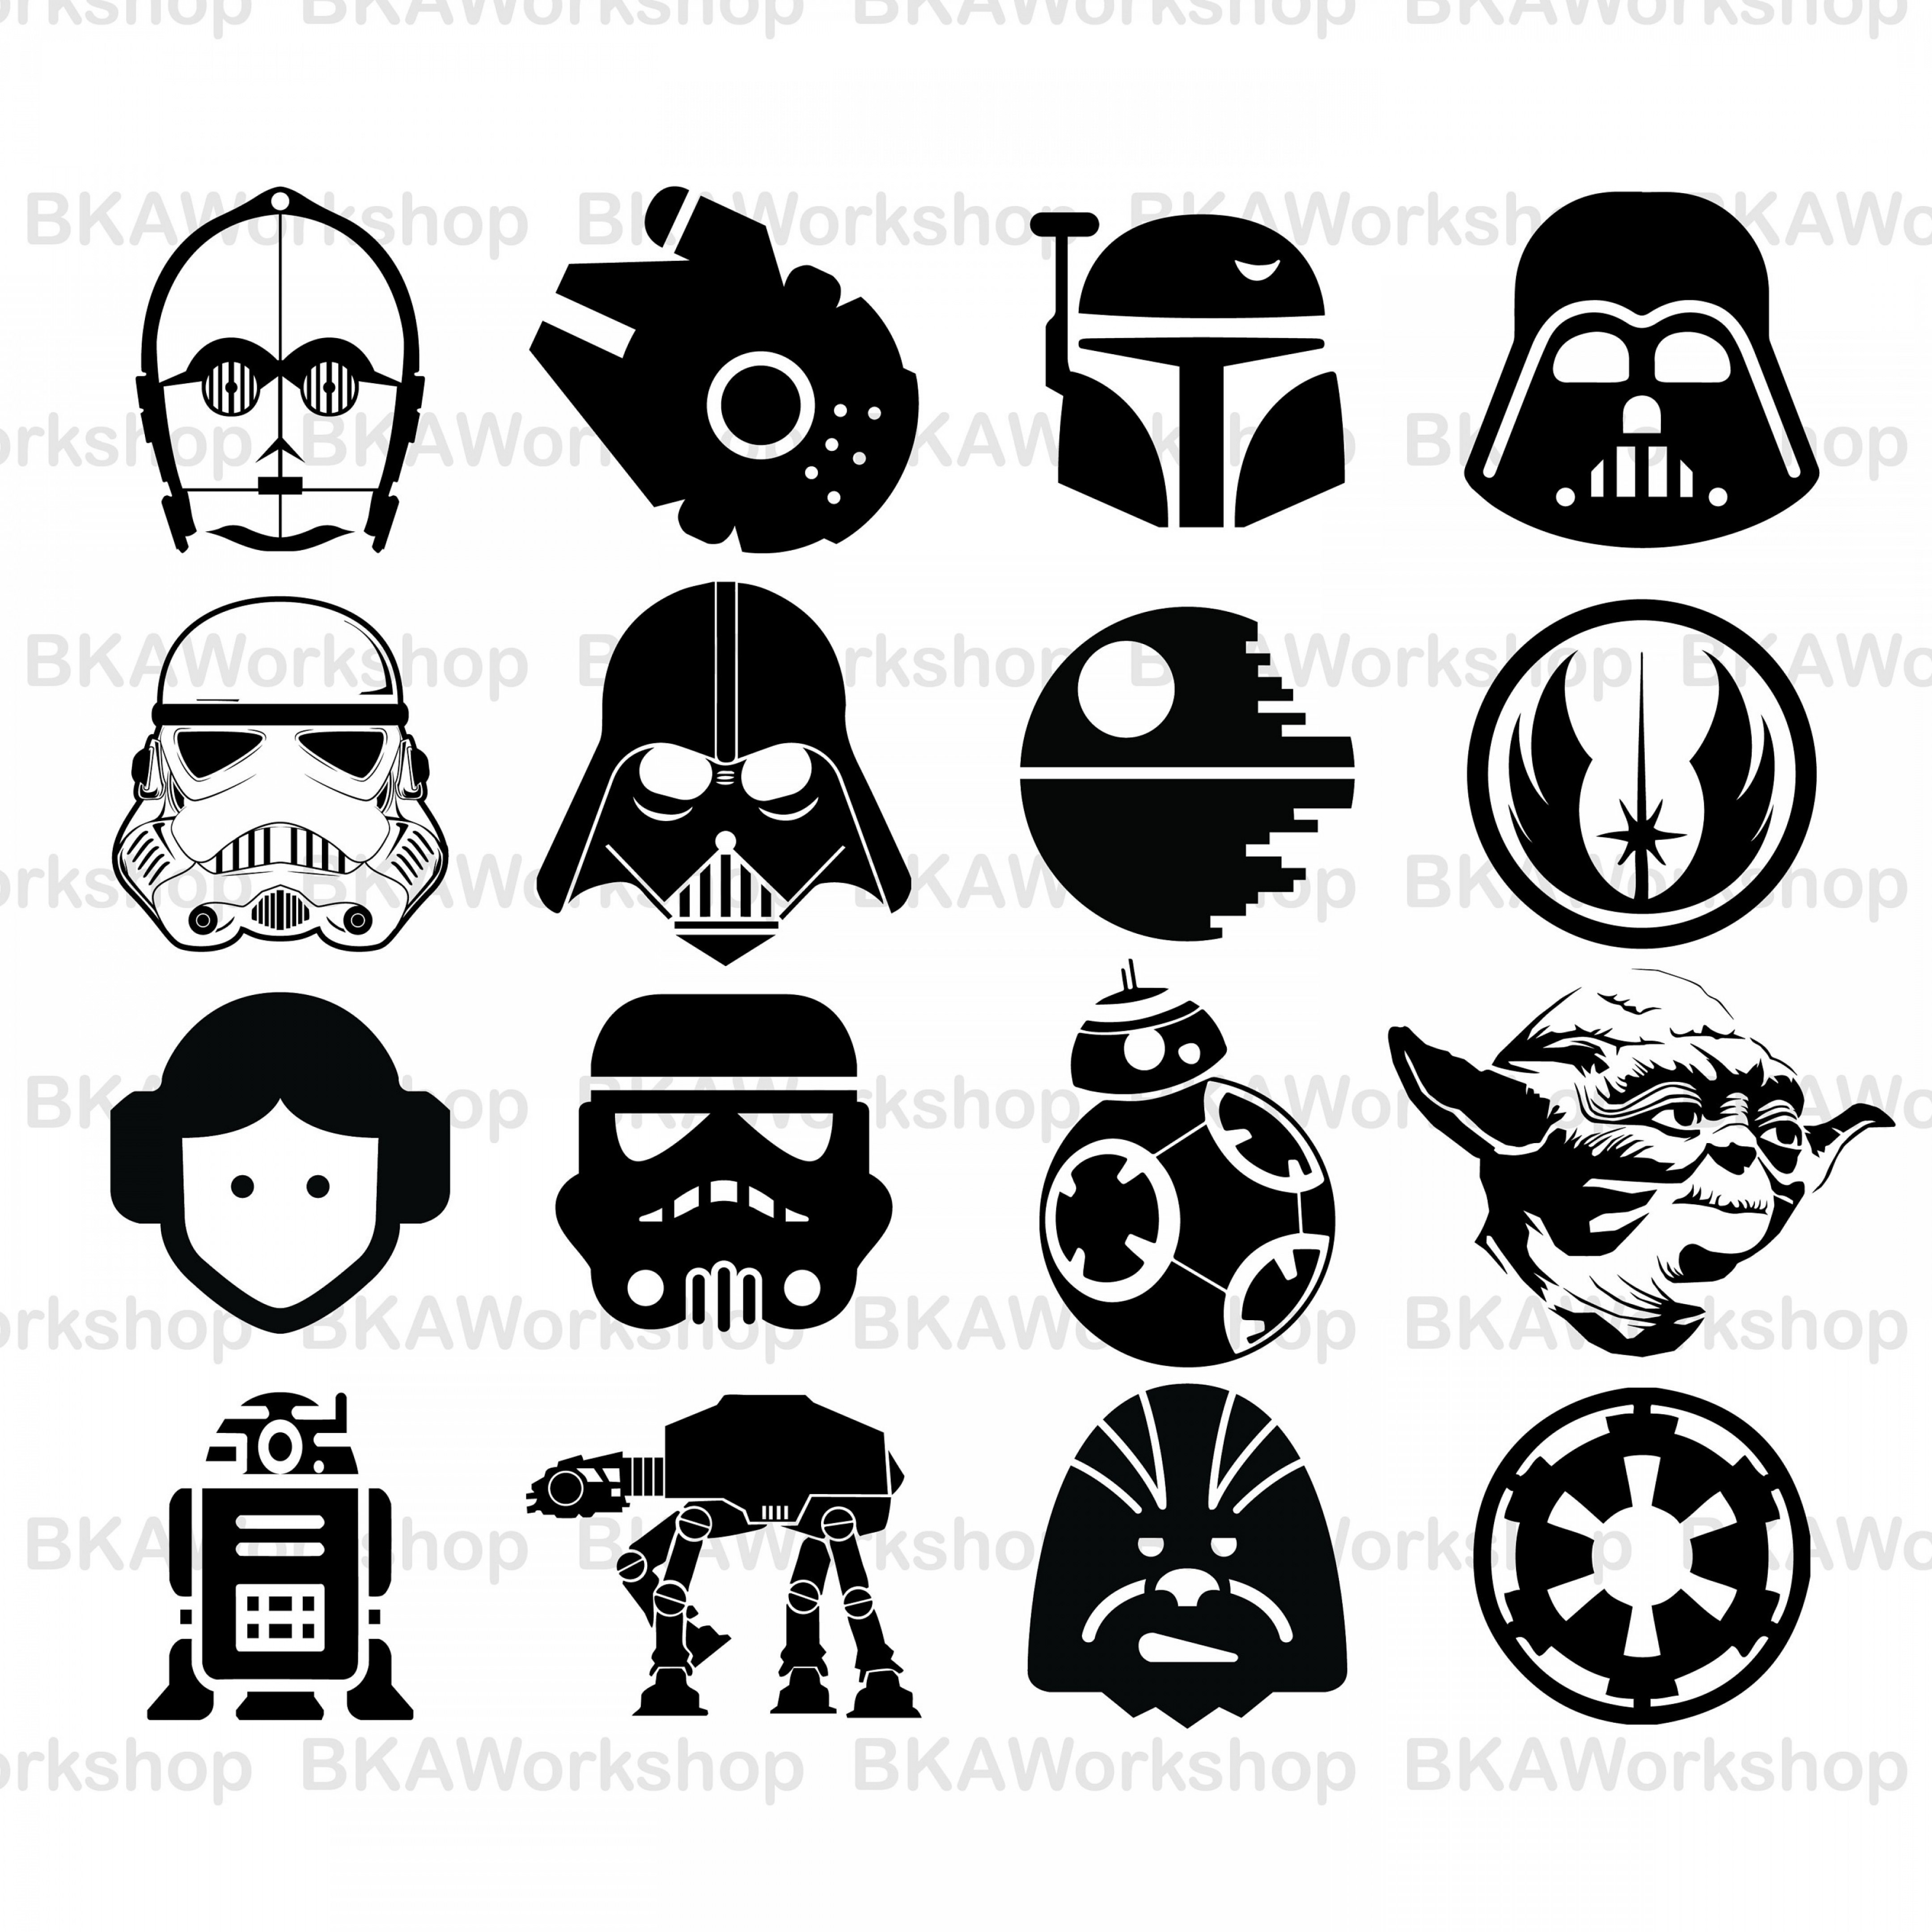 Download free star wars vector logo and icons in ai eps cdr svg png formats...